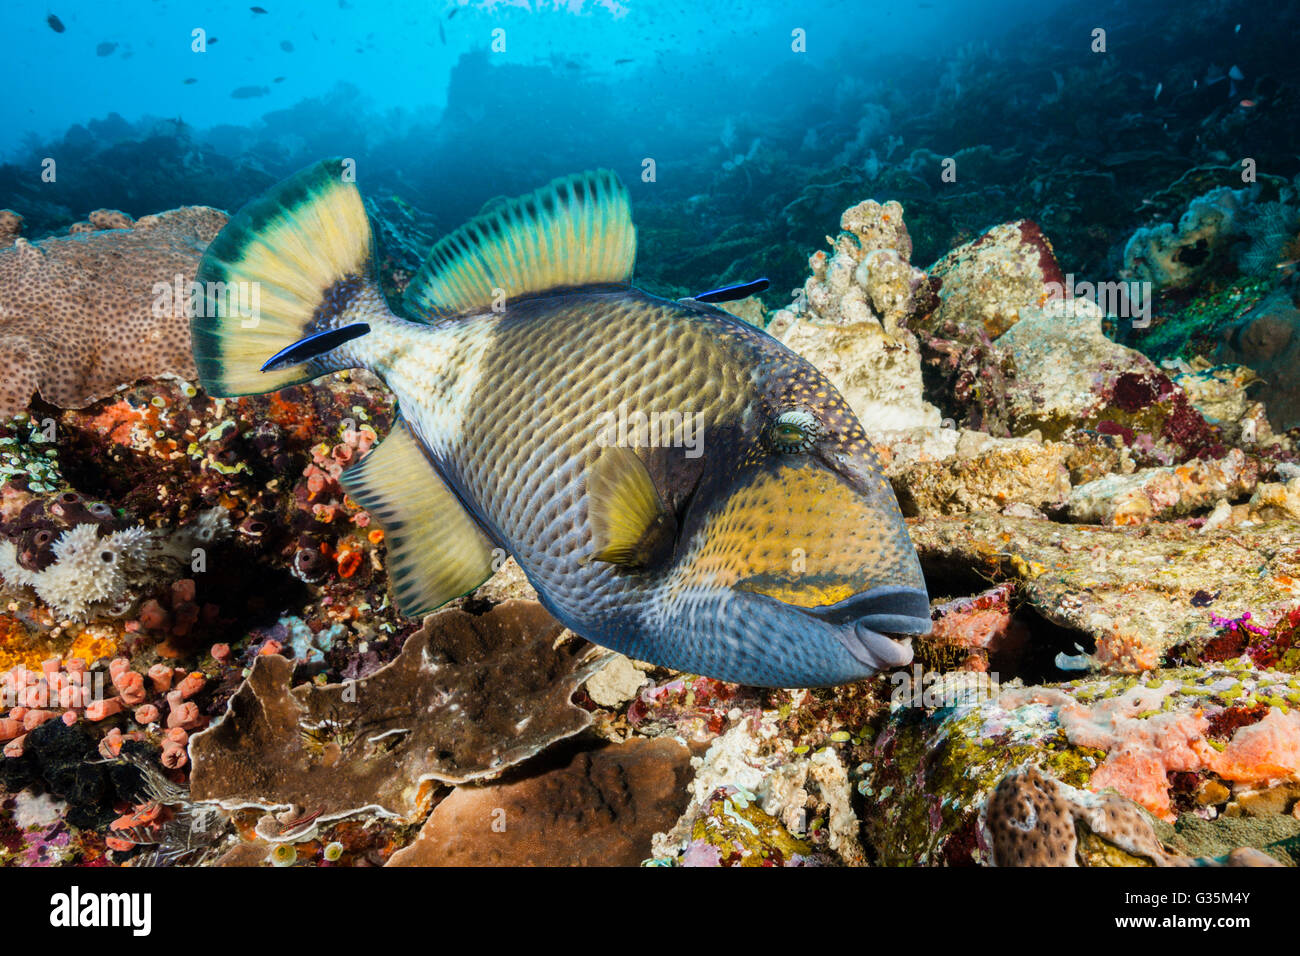 Giant Triggerfish beeing cleaned, Balistoides viridescens, Komodo National Park, Indonesia Stock Photo